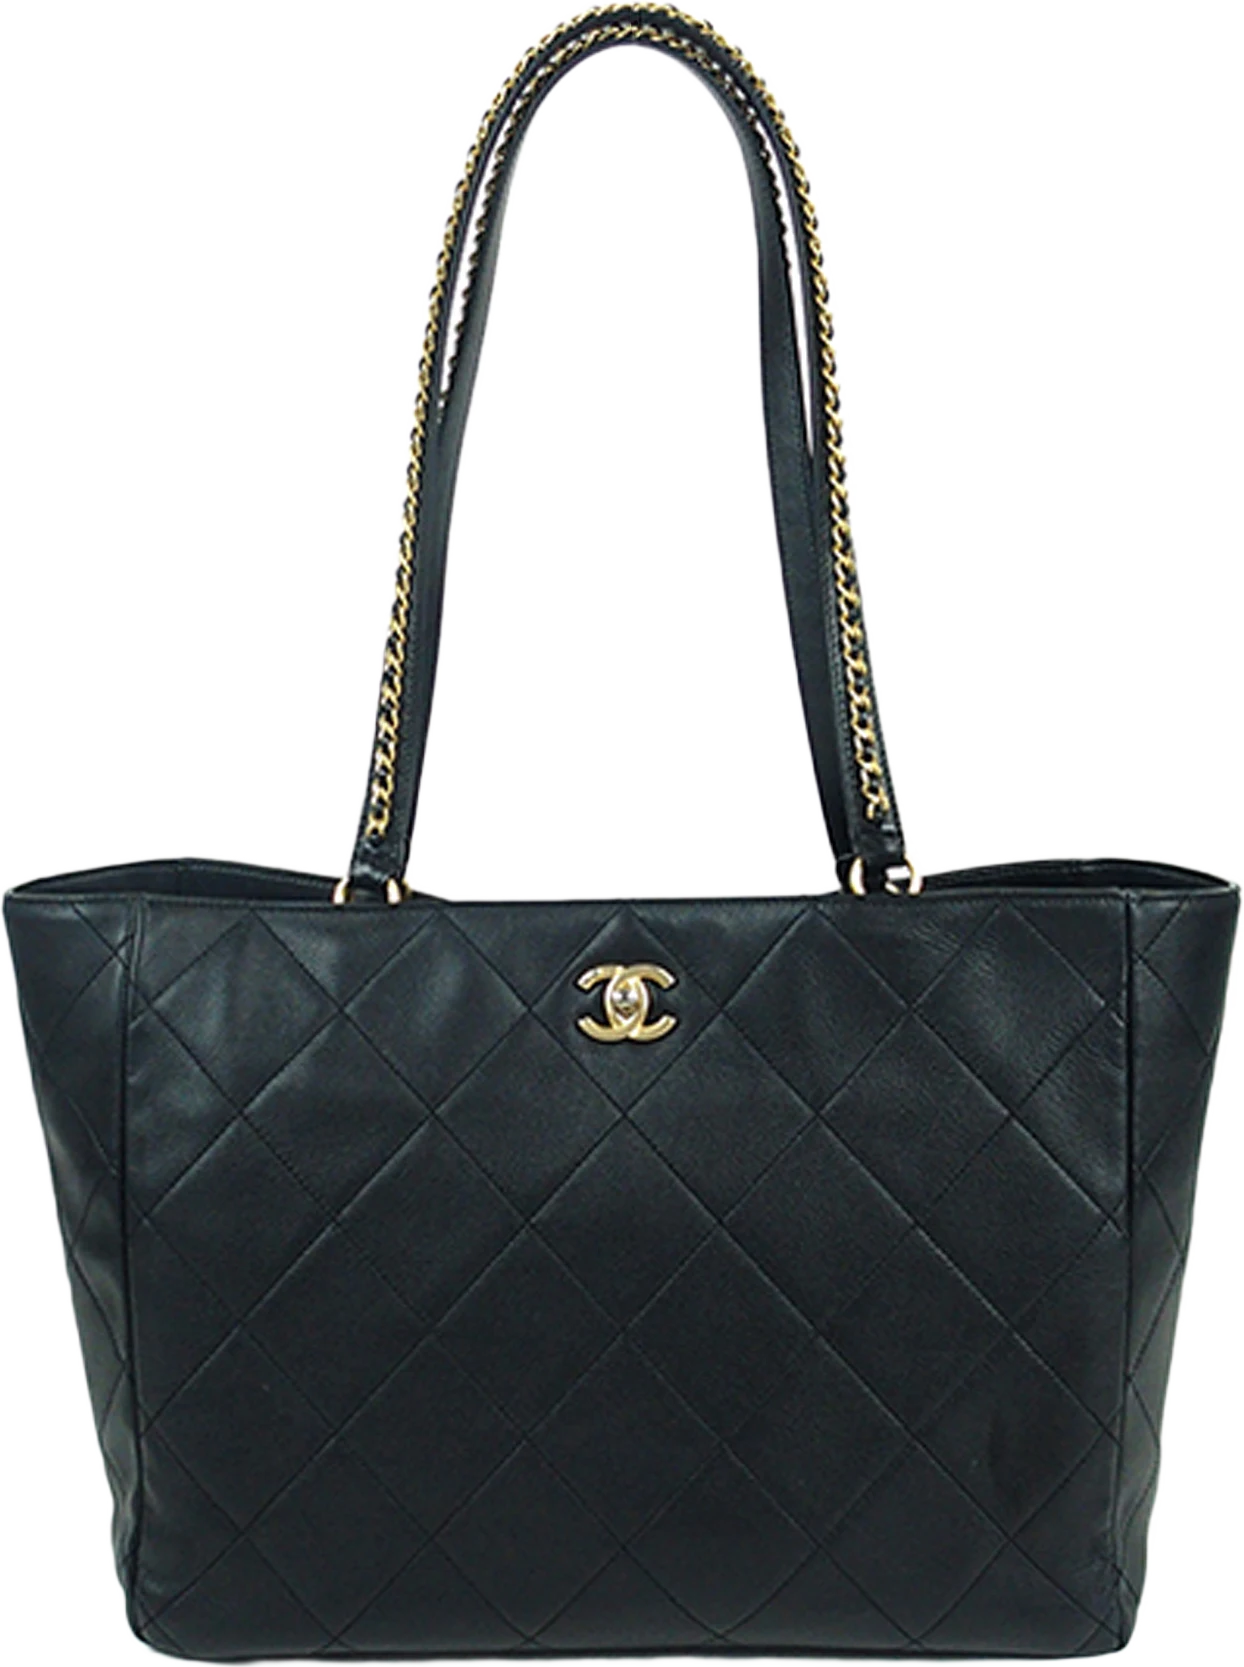 Chanel Cc Quilted Lambskin Tote